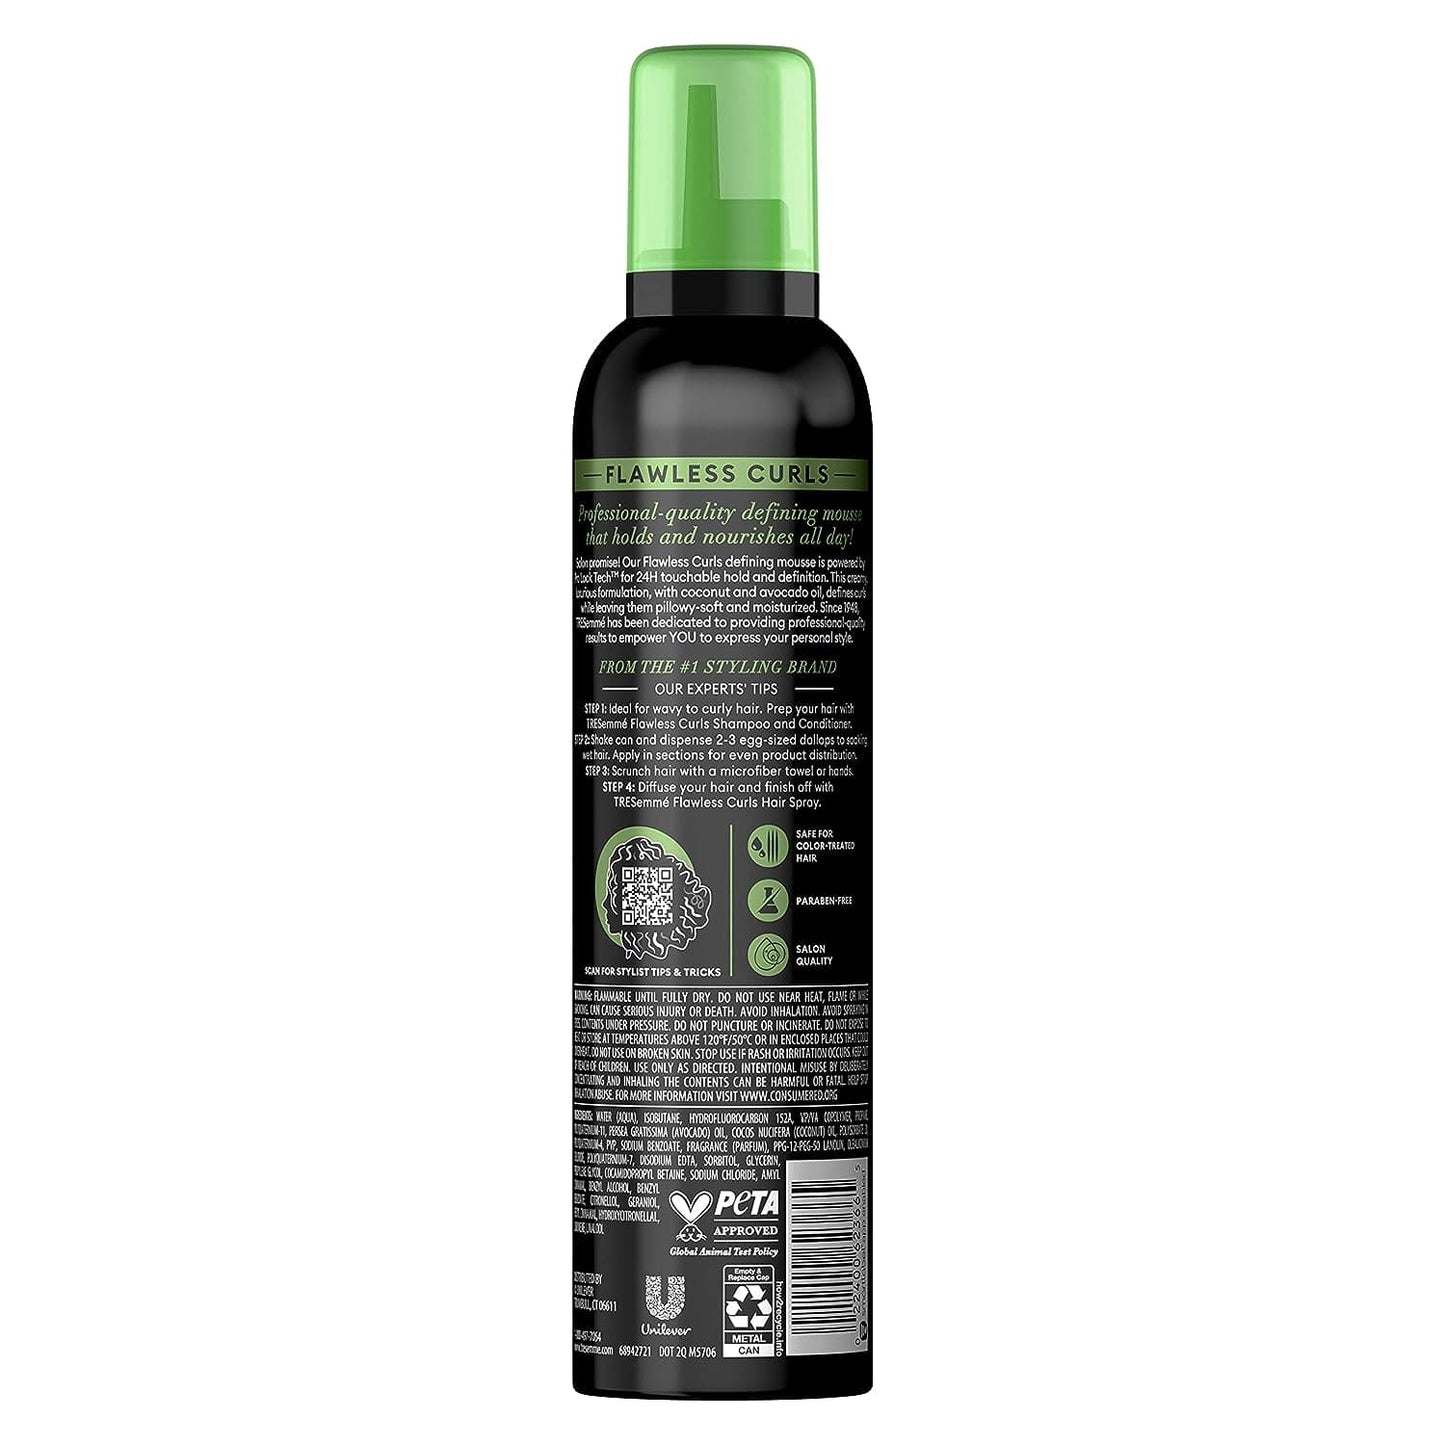 Tresemme Mousse Curl Care X-Hold 10.5oz #49853